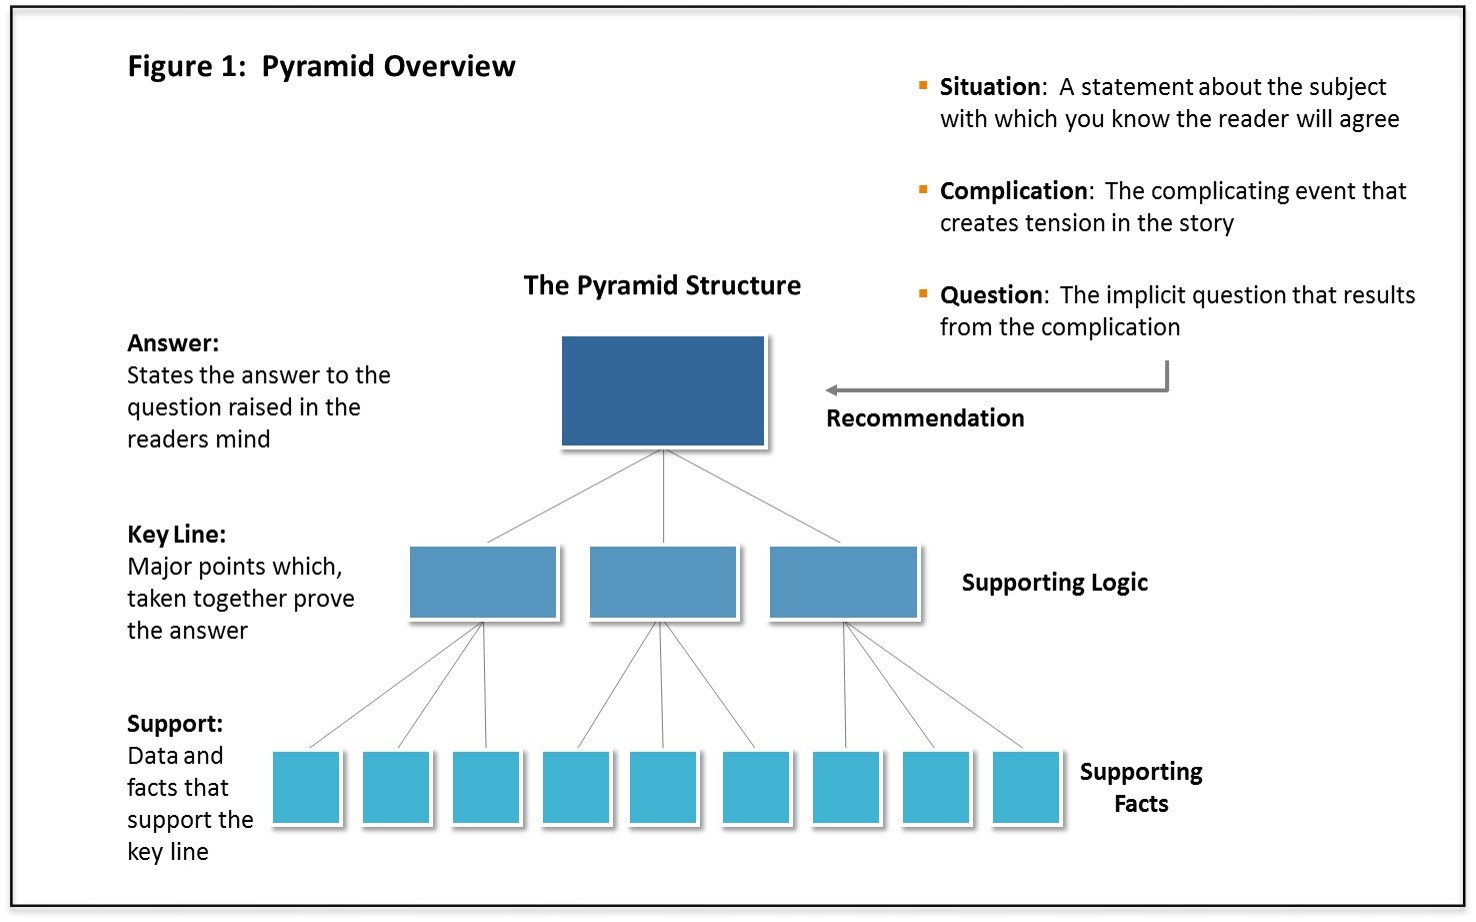 minto-pyramid-overview